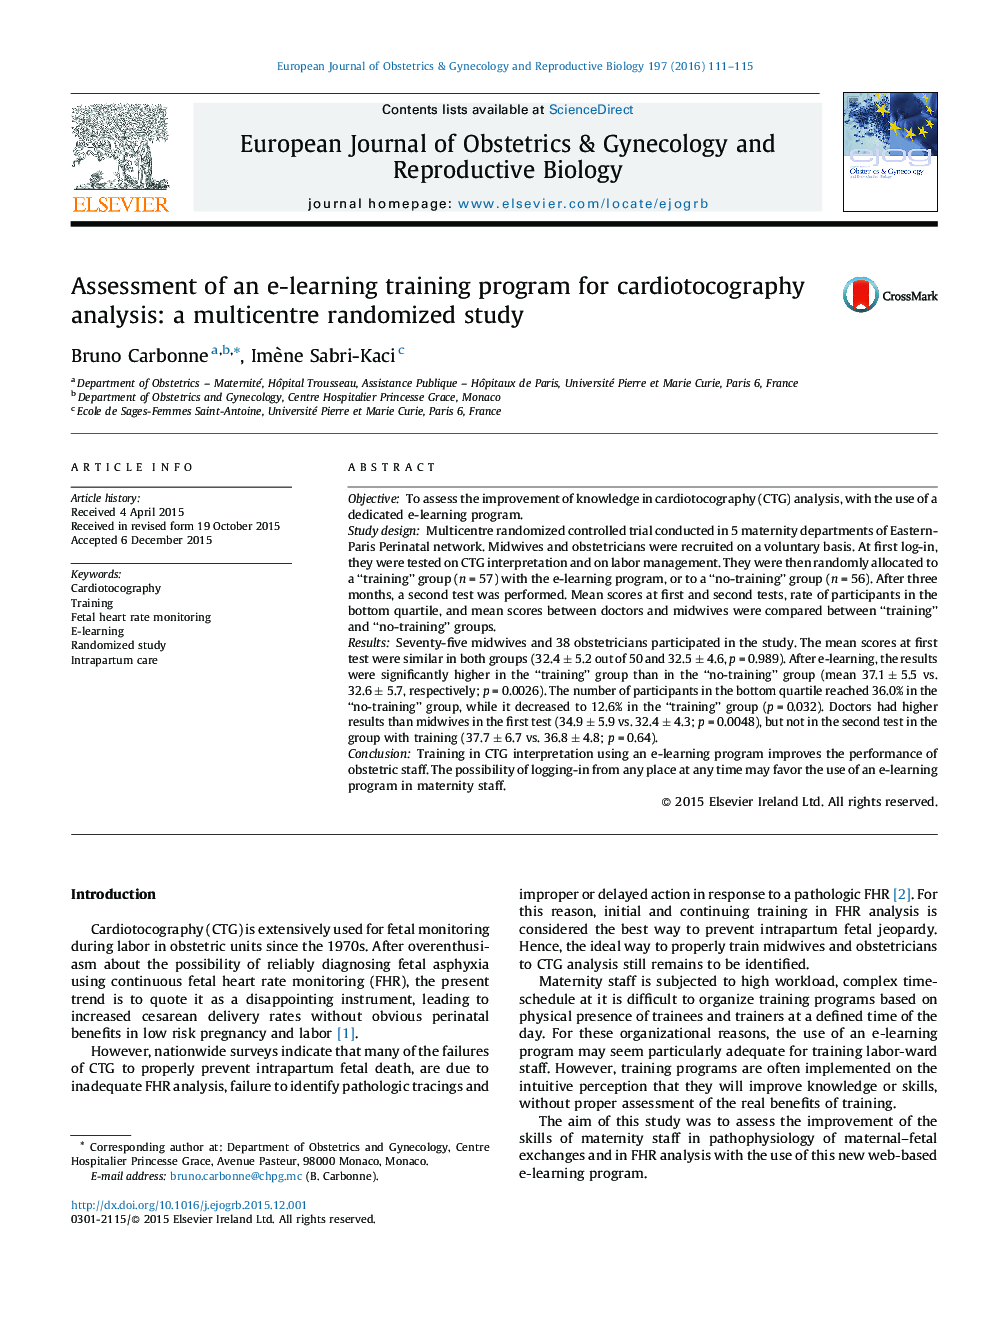 Assessment of an e-learning training program for cardiotocography analysis: a multicentre randomized study